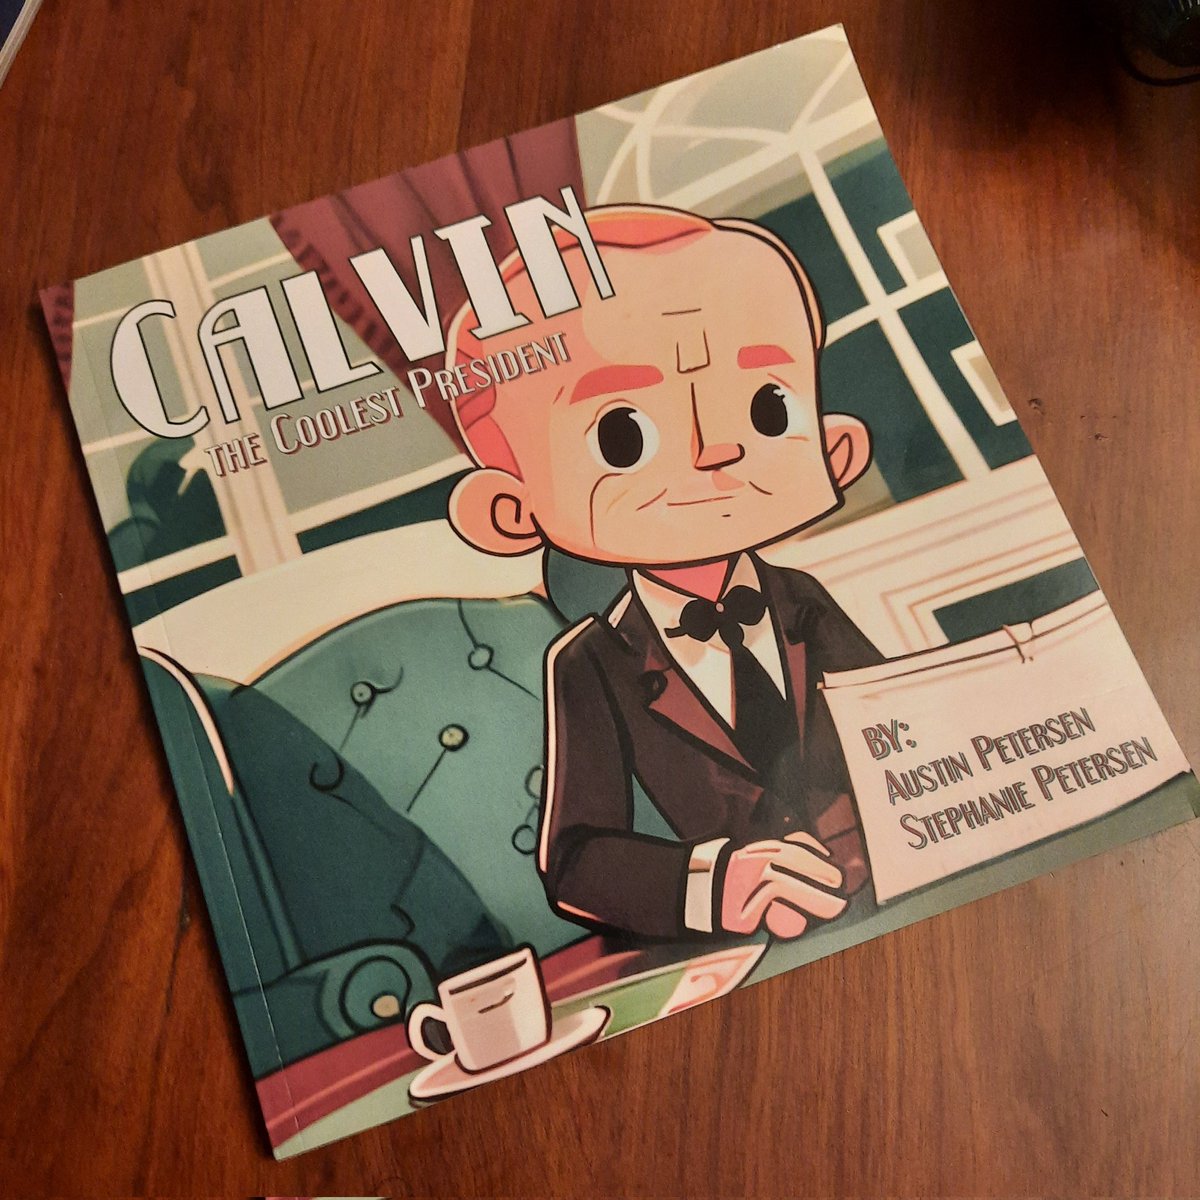 So excited that @AP4Liberty and @SteffiP4Liberty wrote their first book for kids. The life lesson is one I want my 7-year-old to learn, and he thought the book lived up to its cool name. #homeschool #homeschoolresources #homeschoolhistory #PictureBooks #calvincoolidge